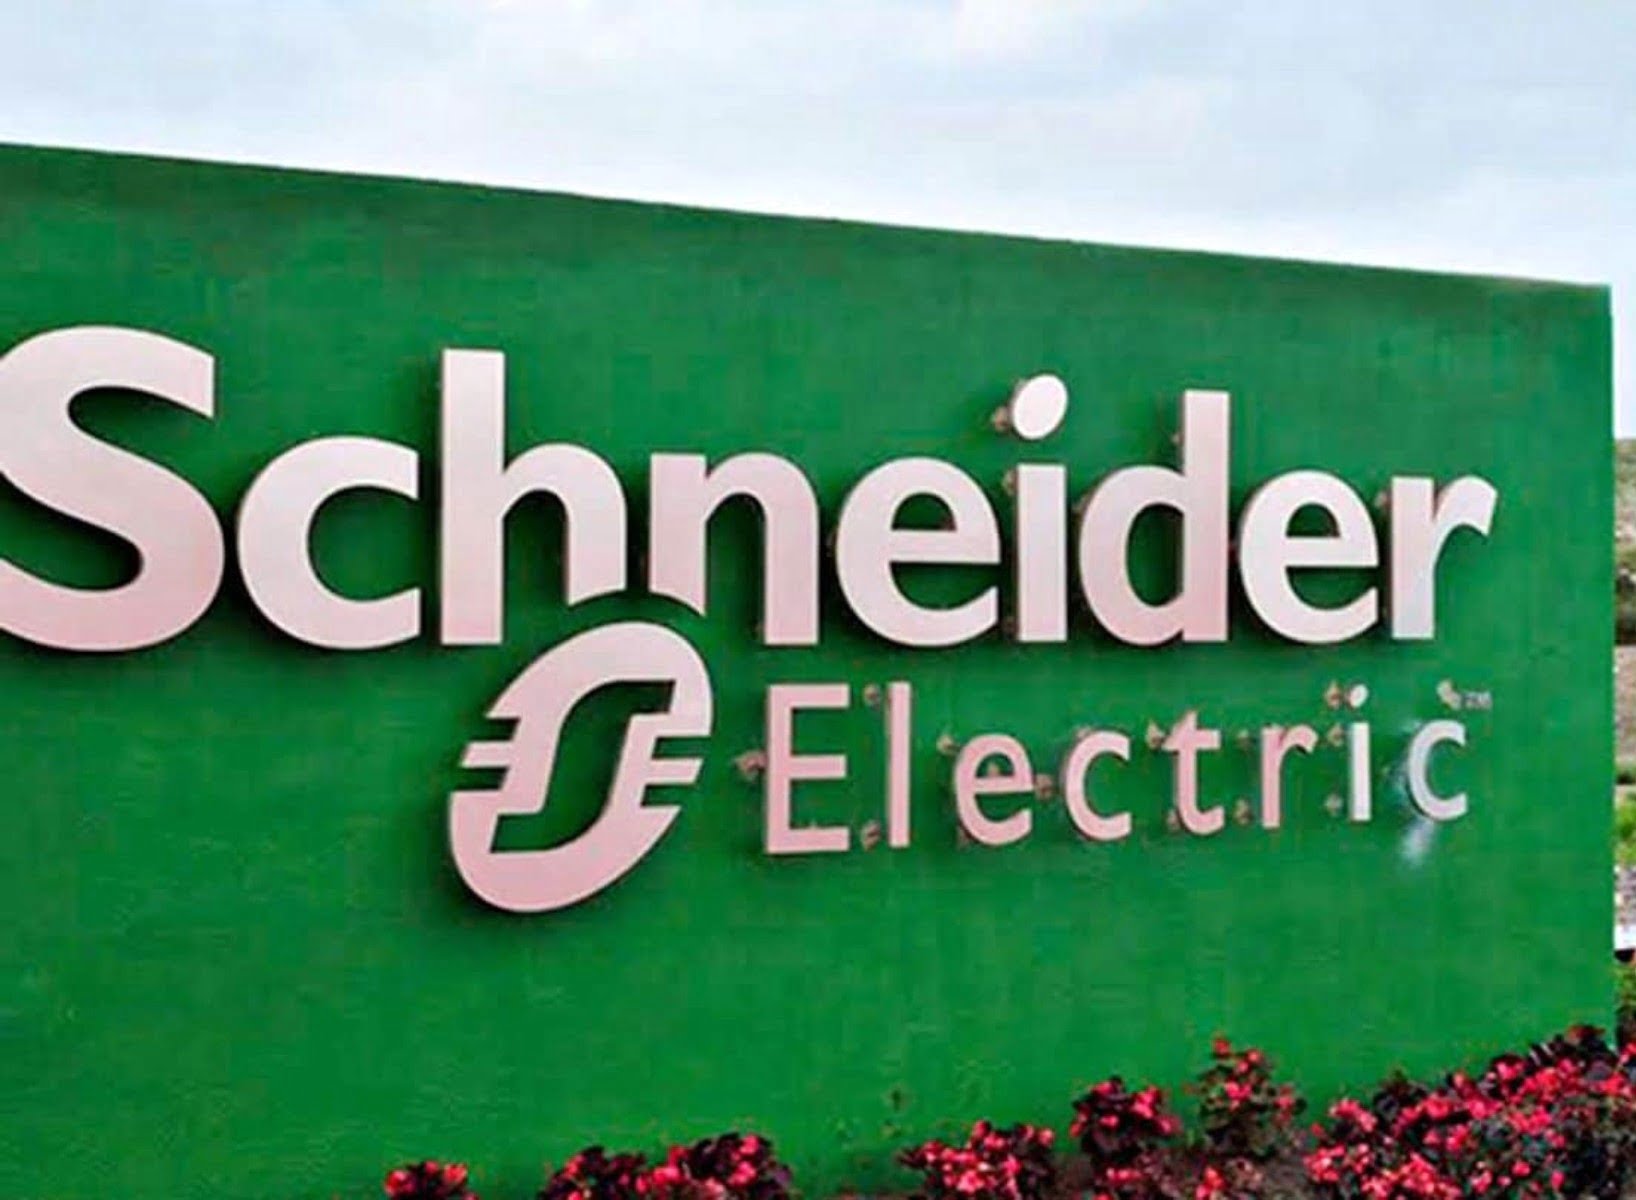 Schneider Electric Internships 2023 for Students and Graduate Professionals